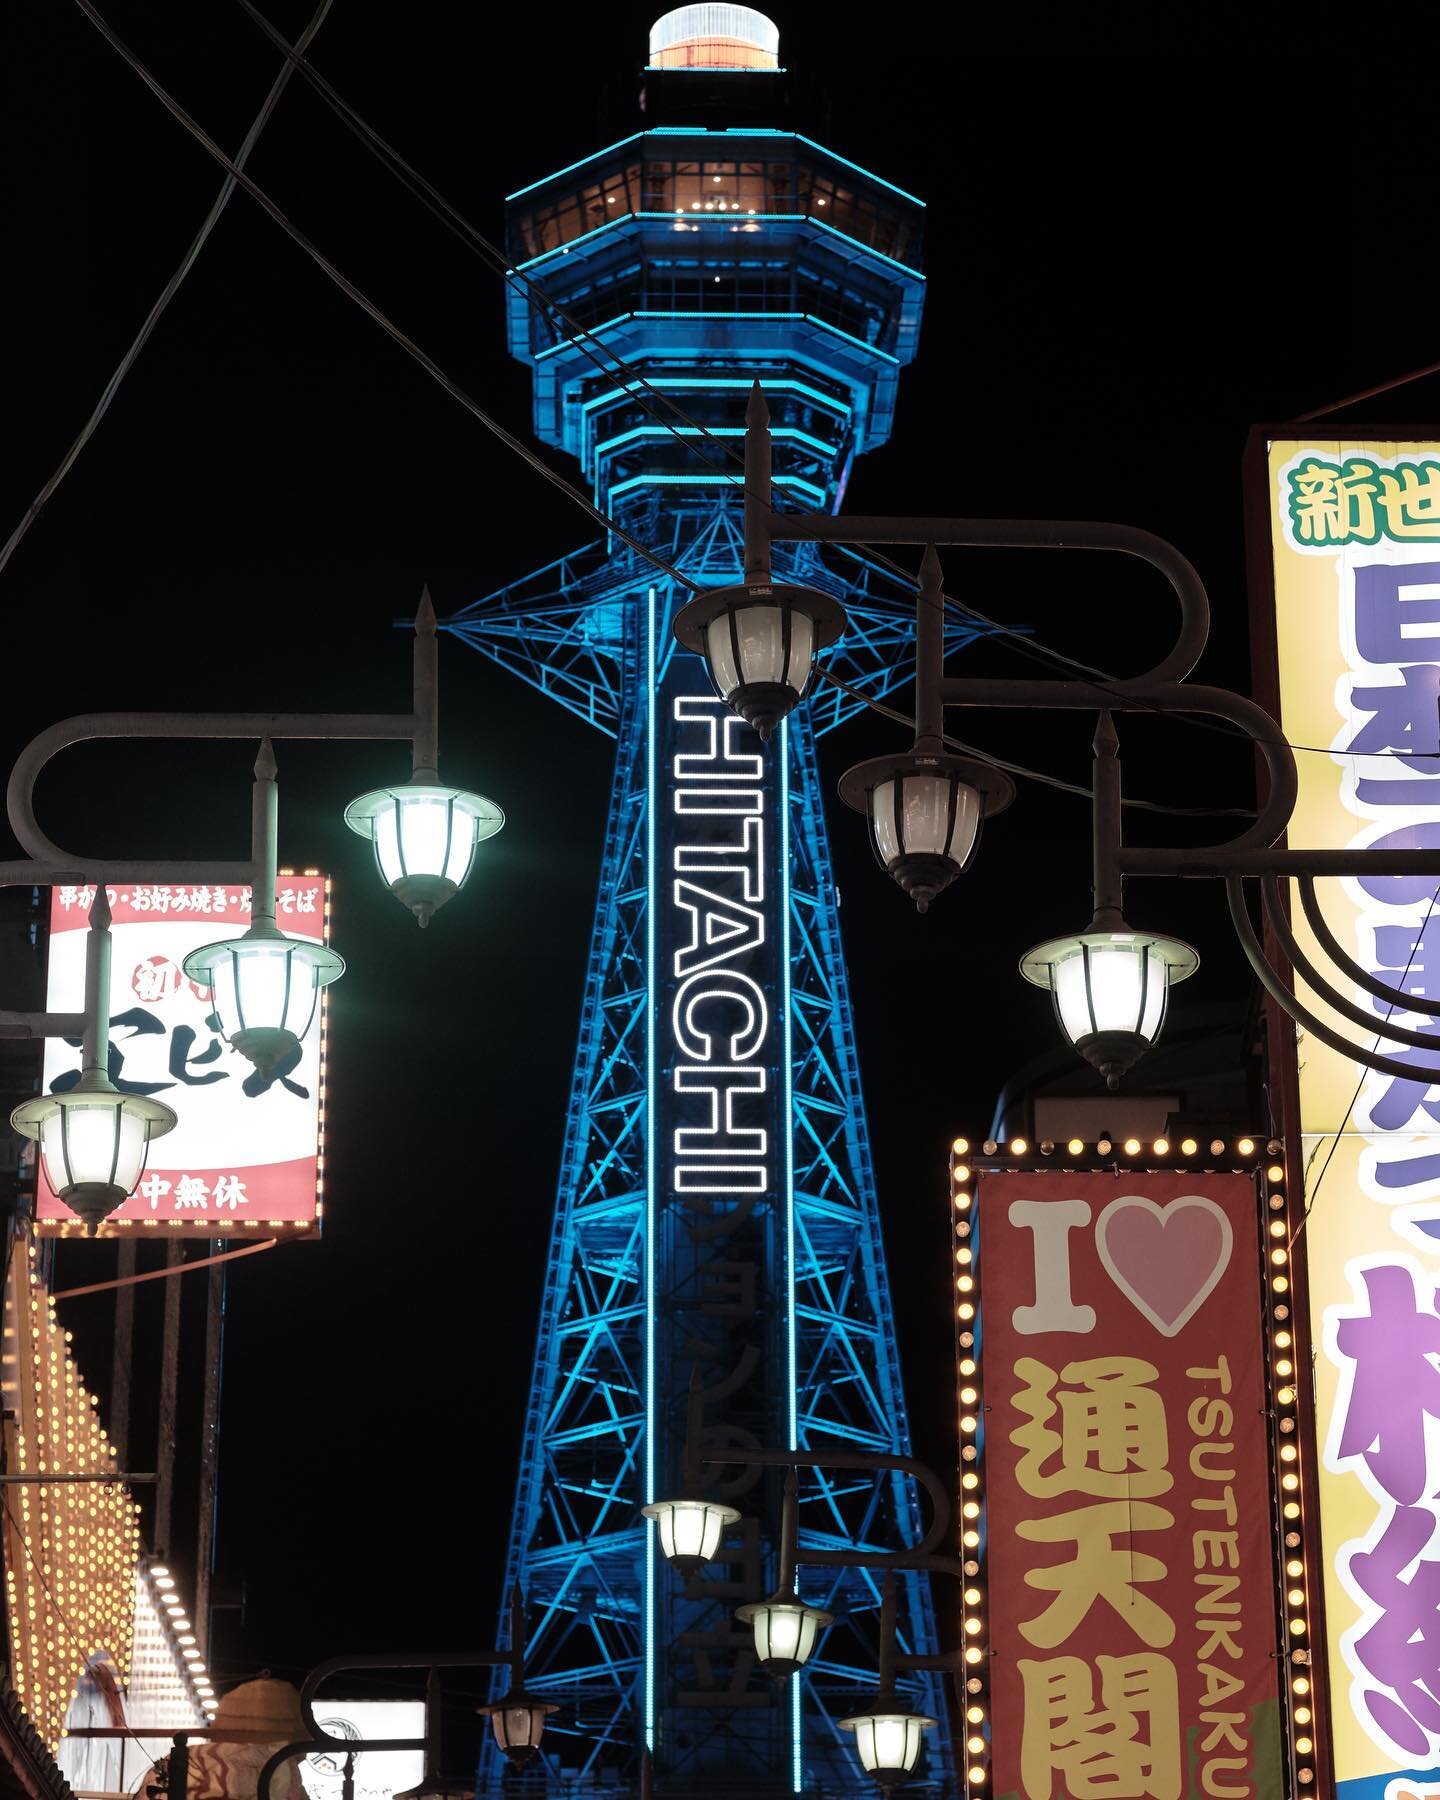 Tsutenkaku⁣
⁣
One of the most well known landmarks in Osaka which just so happens to be sponsored by Hitachi. On the 5th floor observatory as well as a stunning view of Osaka, you will also find a statue of Biriken who will bring you good luck if you